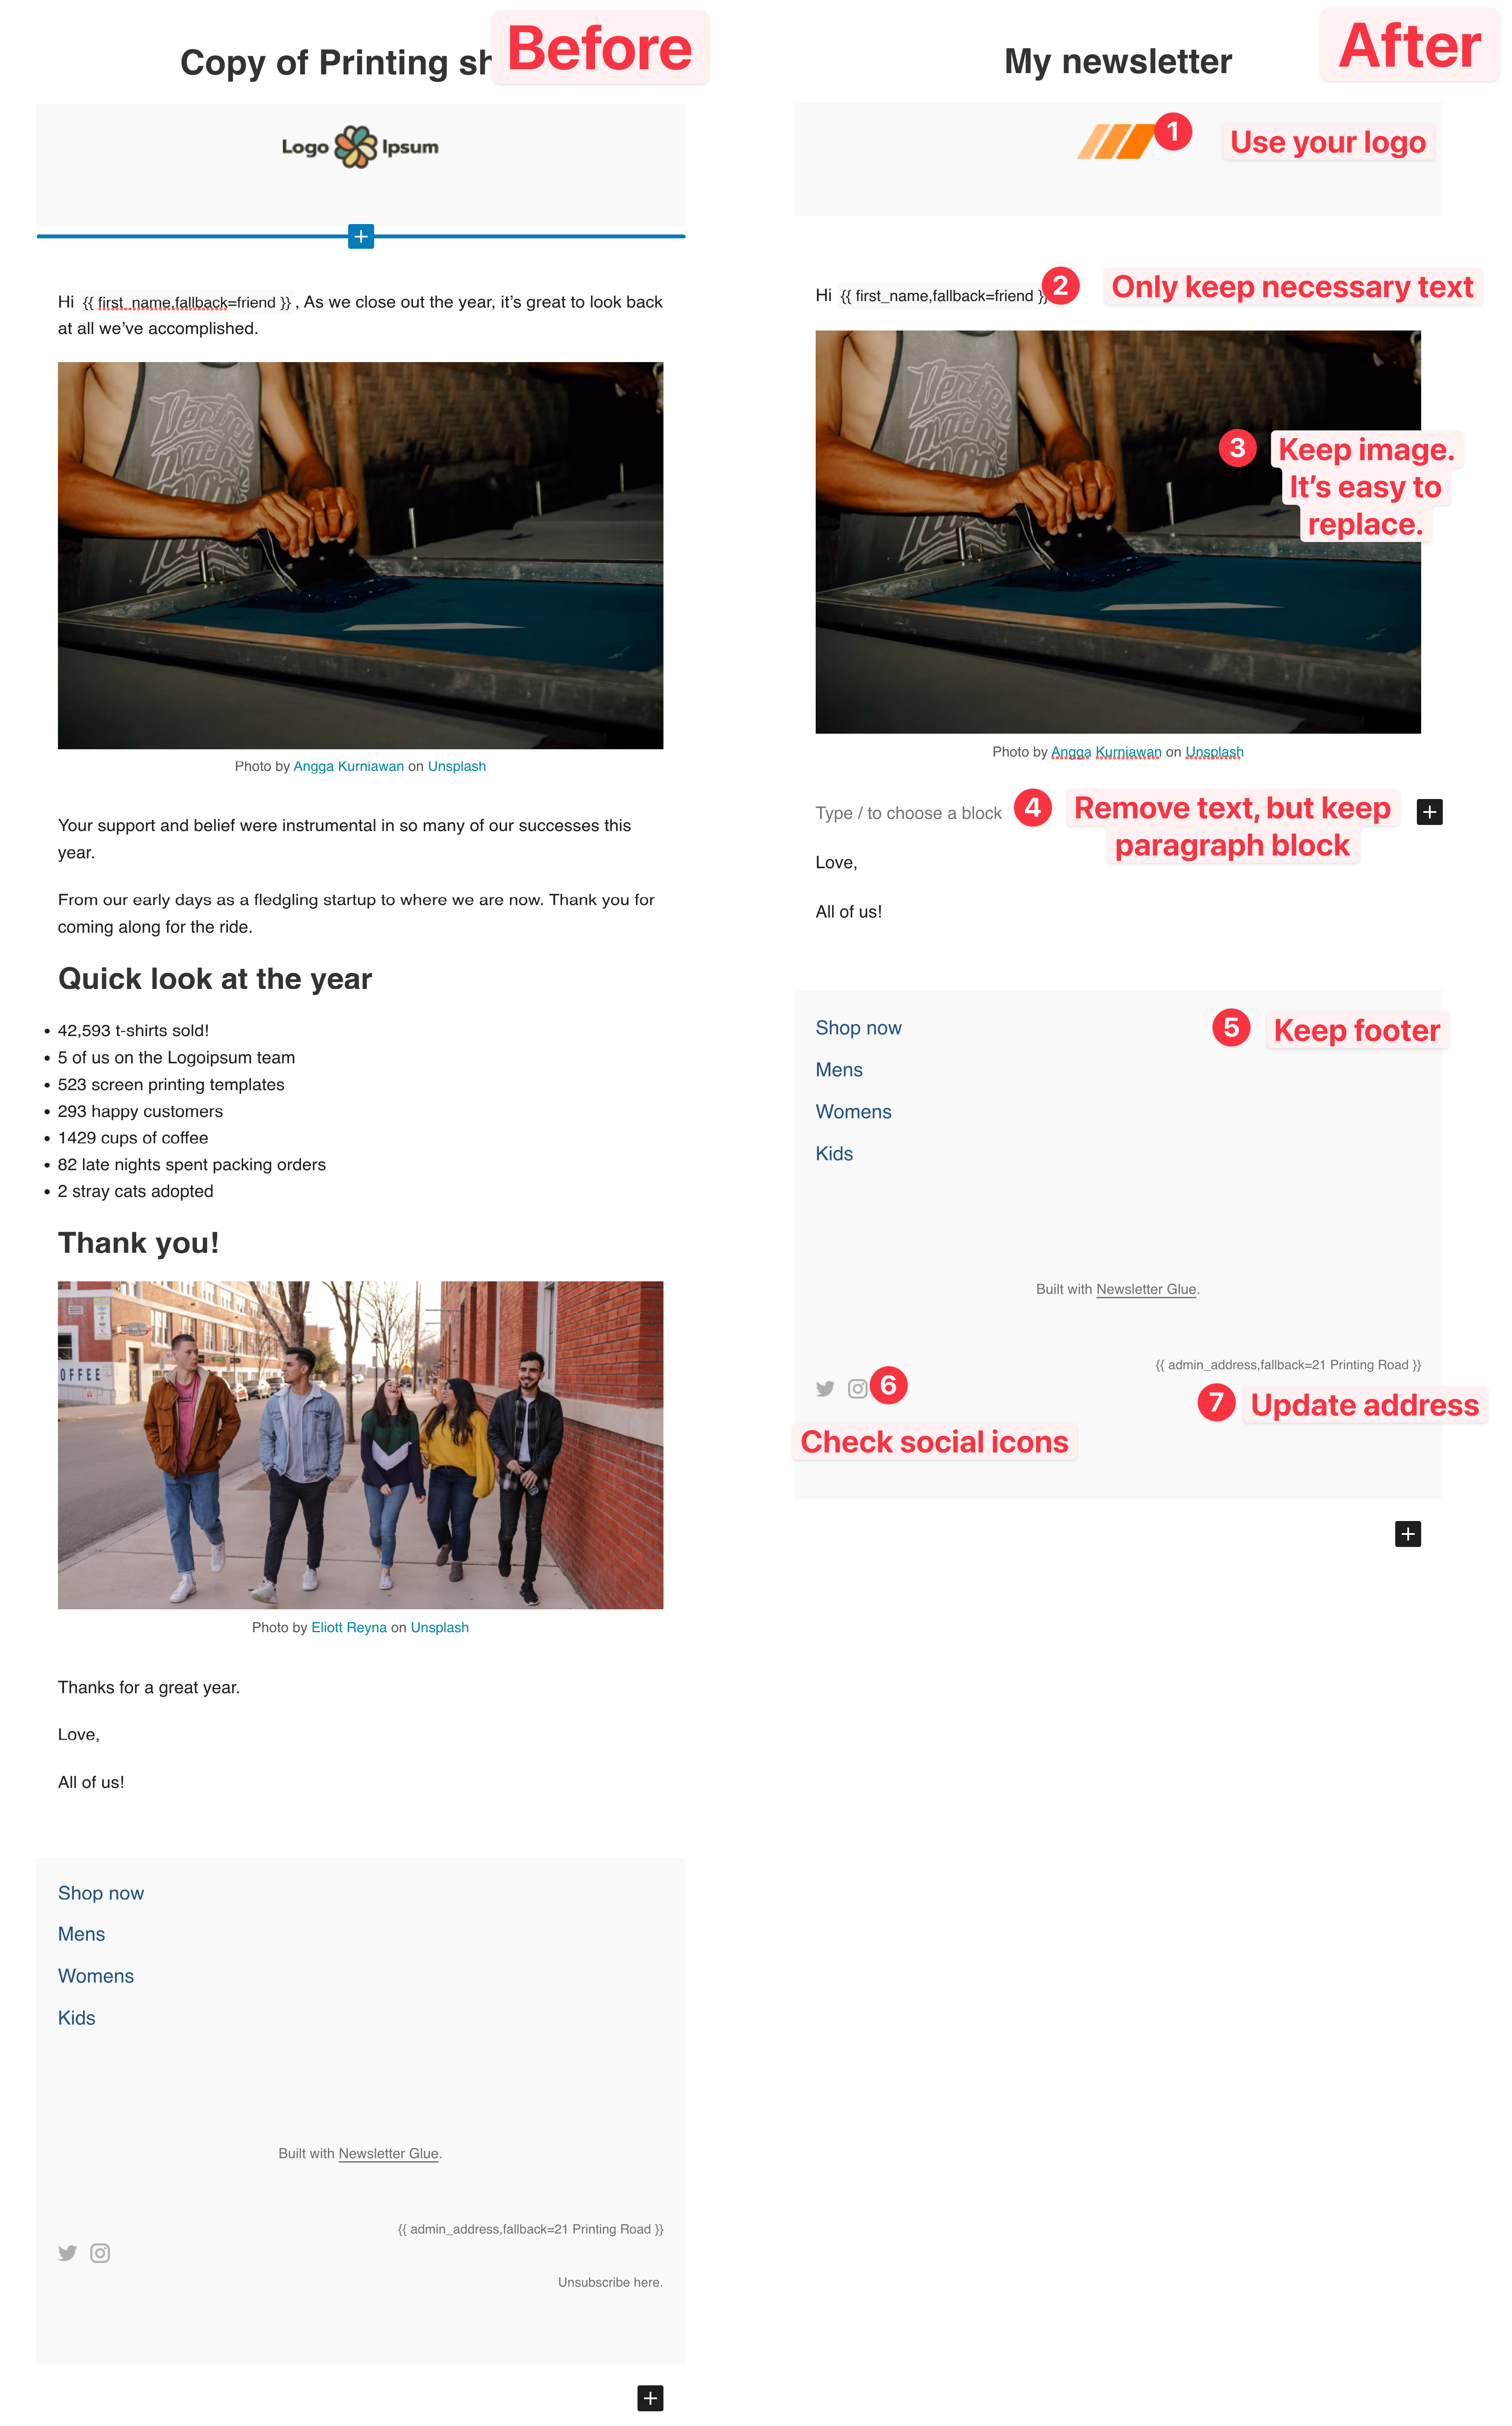 Screenshot of newsletter templates before and after. With the after showing 7 things you can do to update your template.